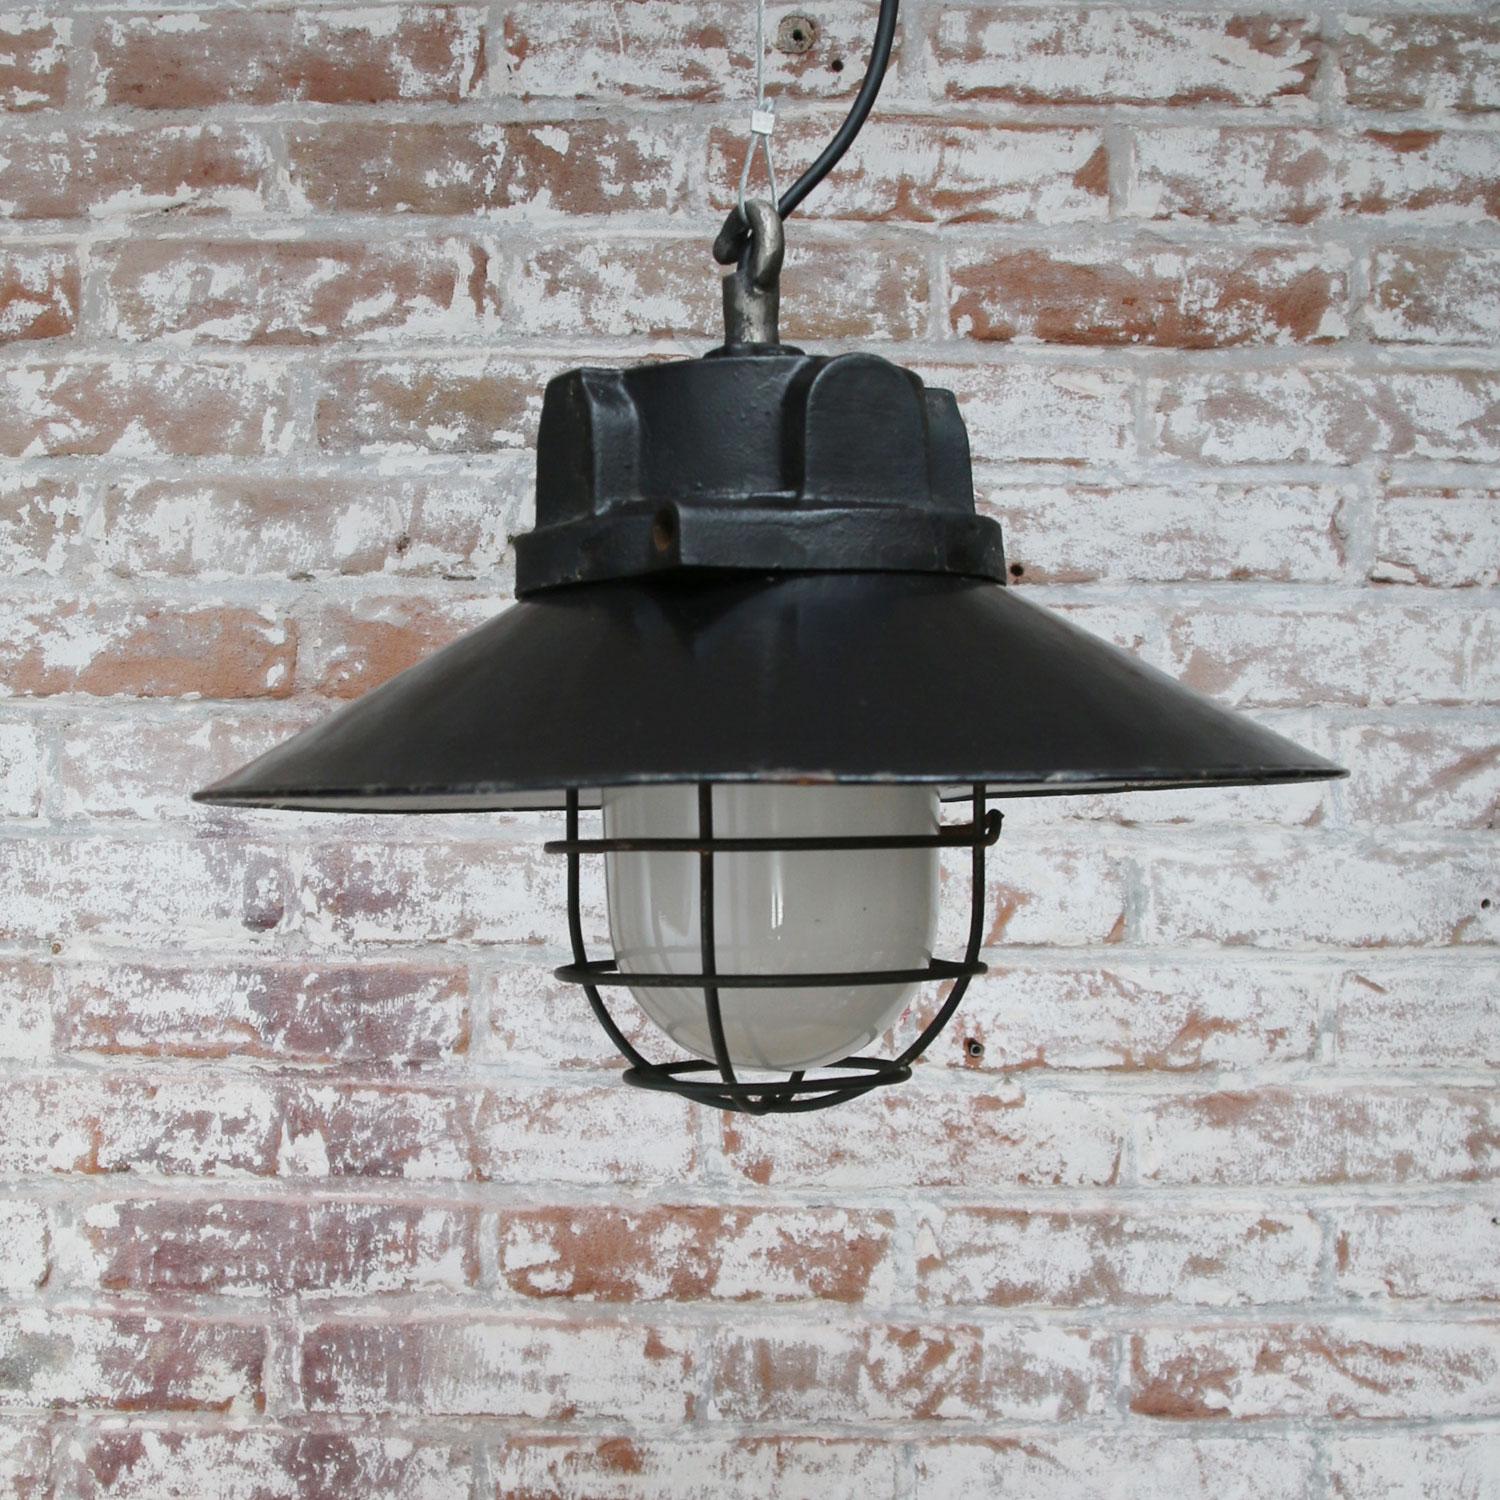 20th Century Black Enamel Vintage Industrial Cast Iron Top Frosted Glass Pendant Lights (5x)